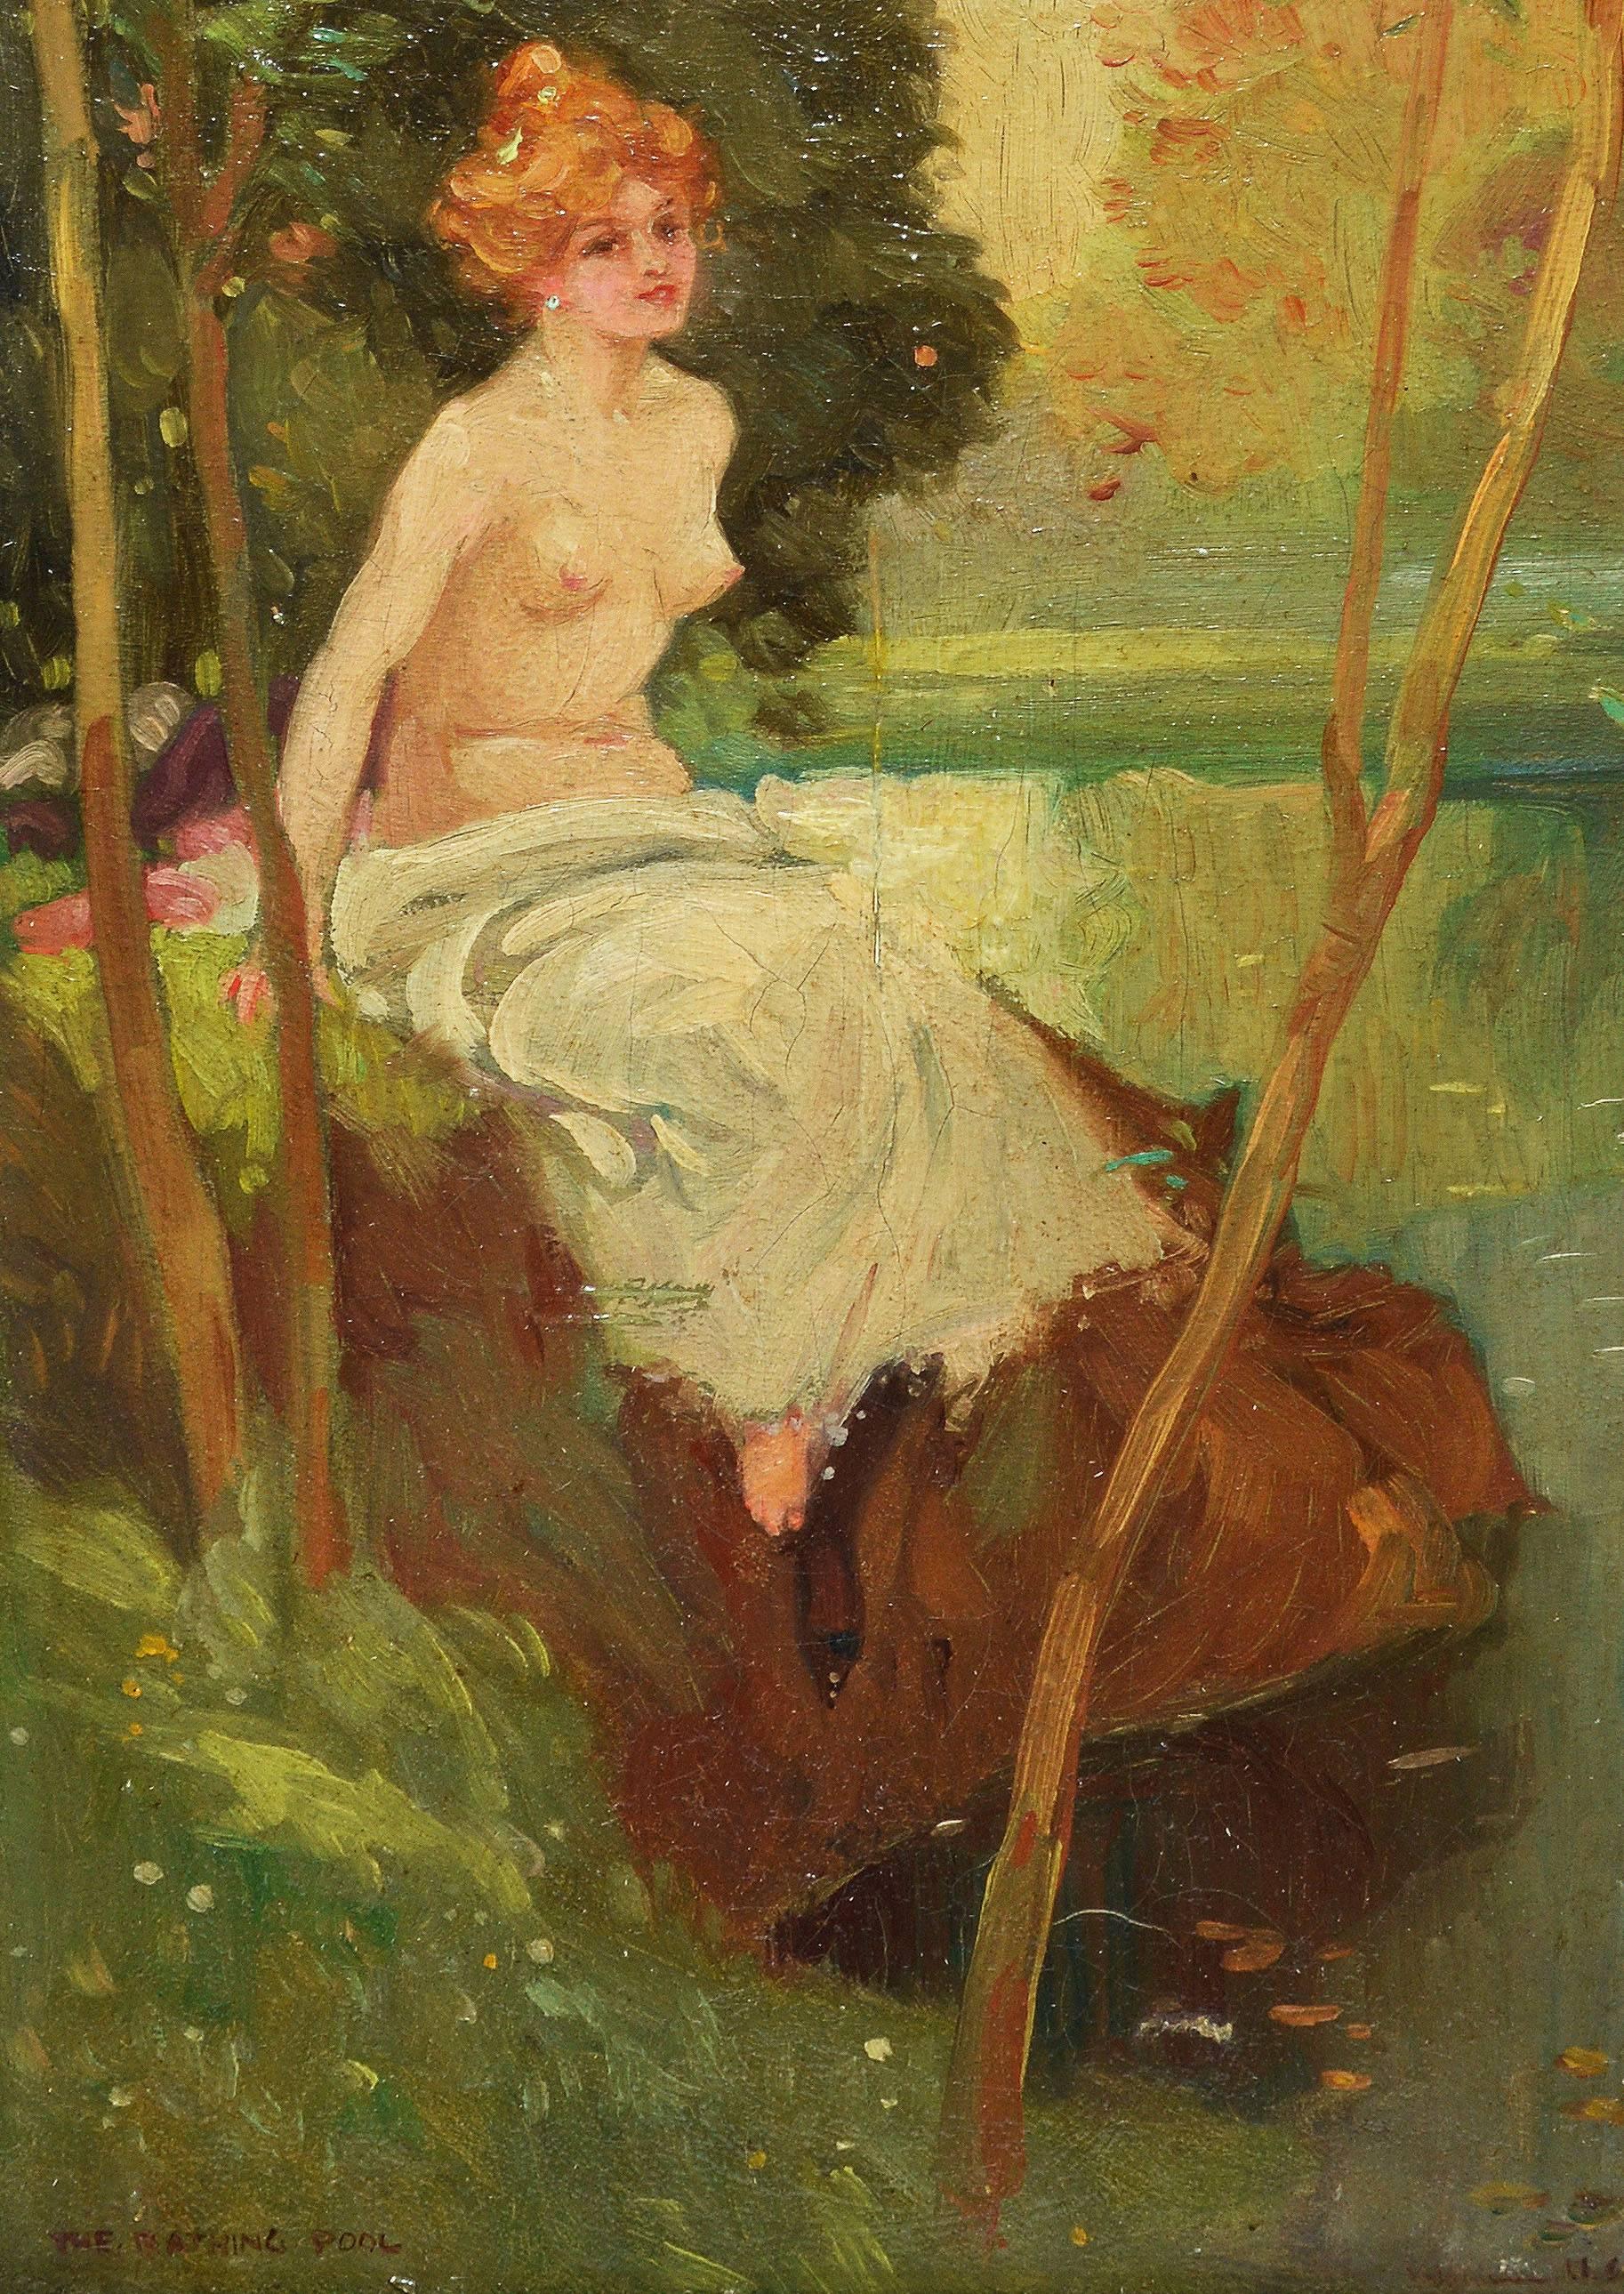 Nude in a Forest - Impressionist Painting by Unknown